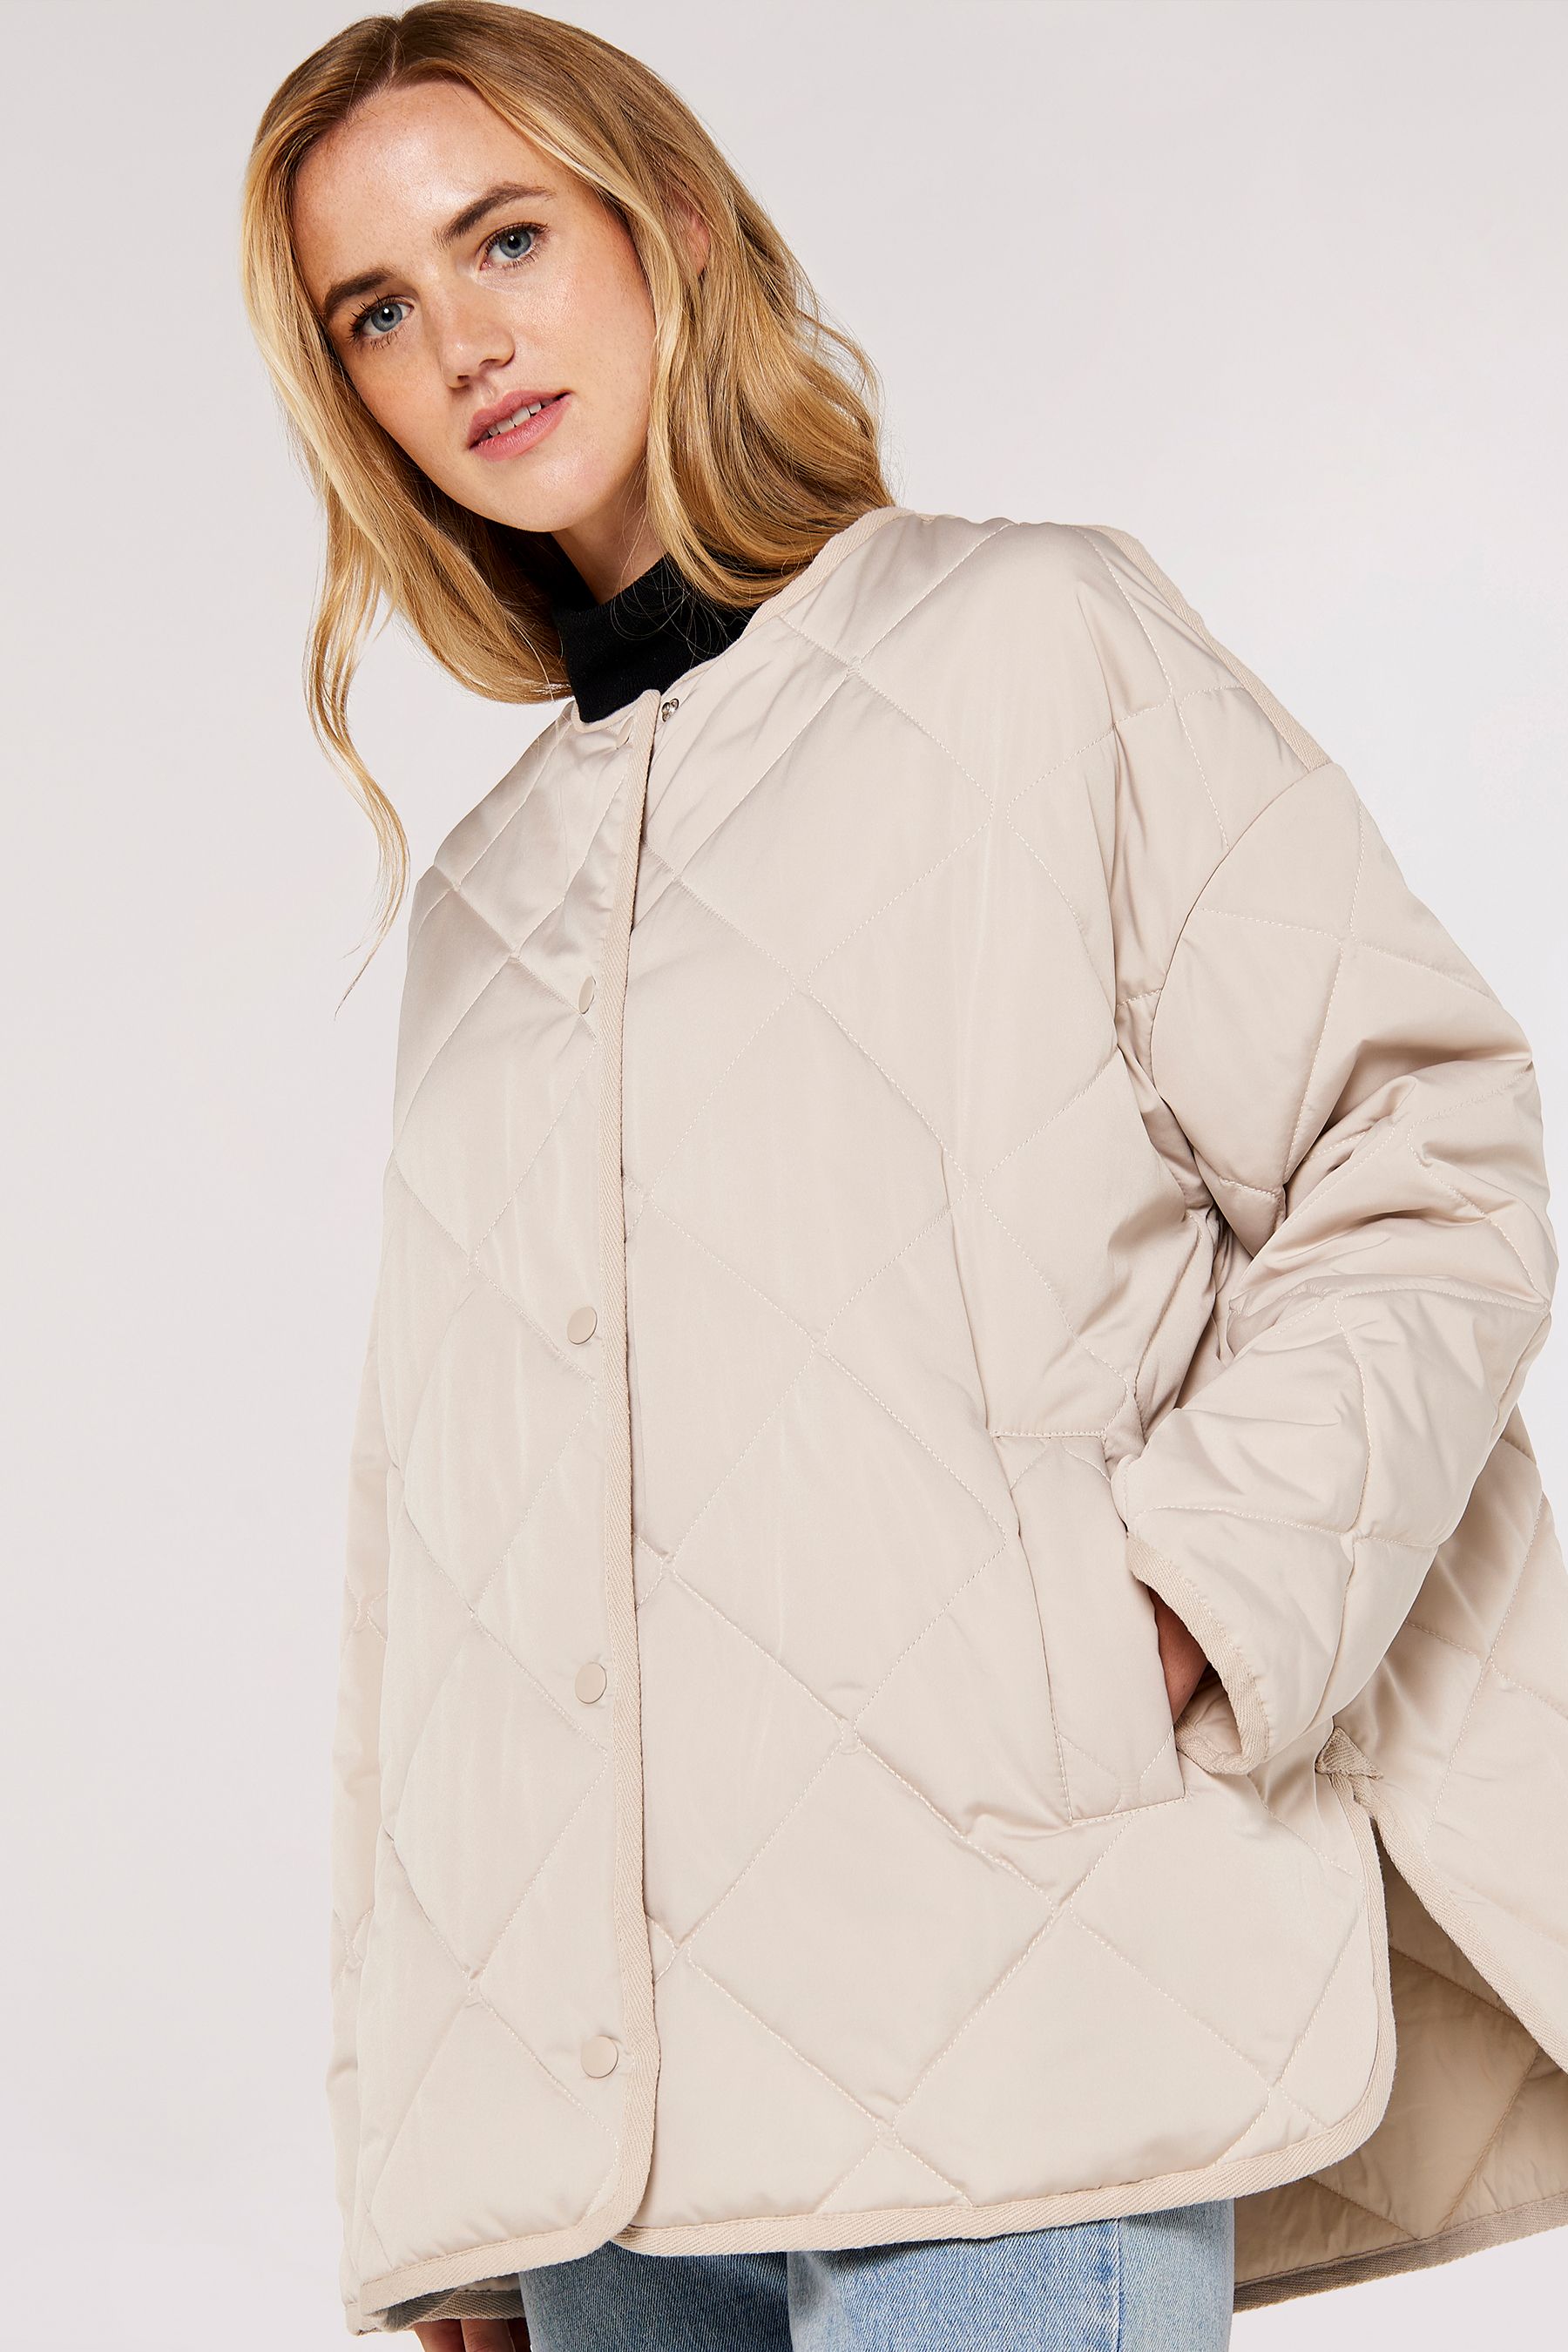 Buy Apricot Cream Collarless Quilted Jacket from the Next UK online shop